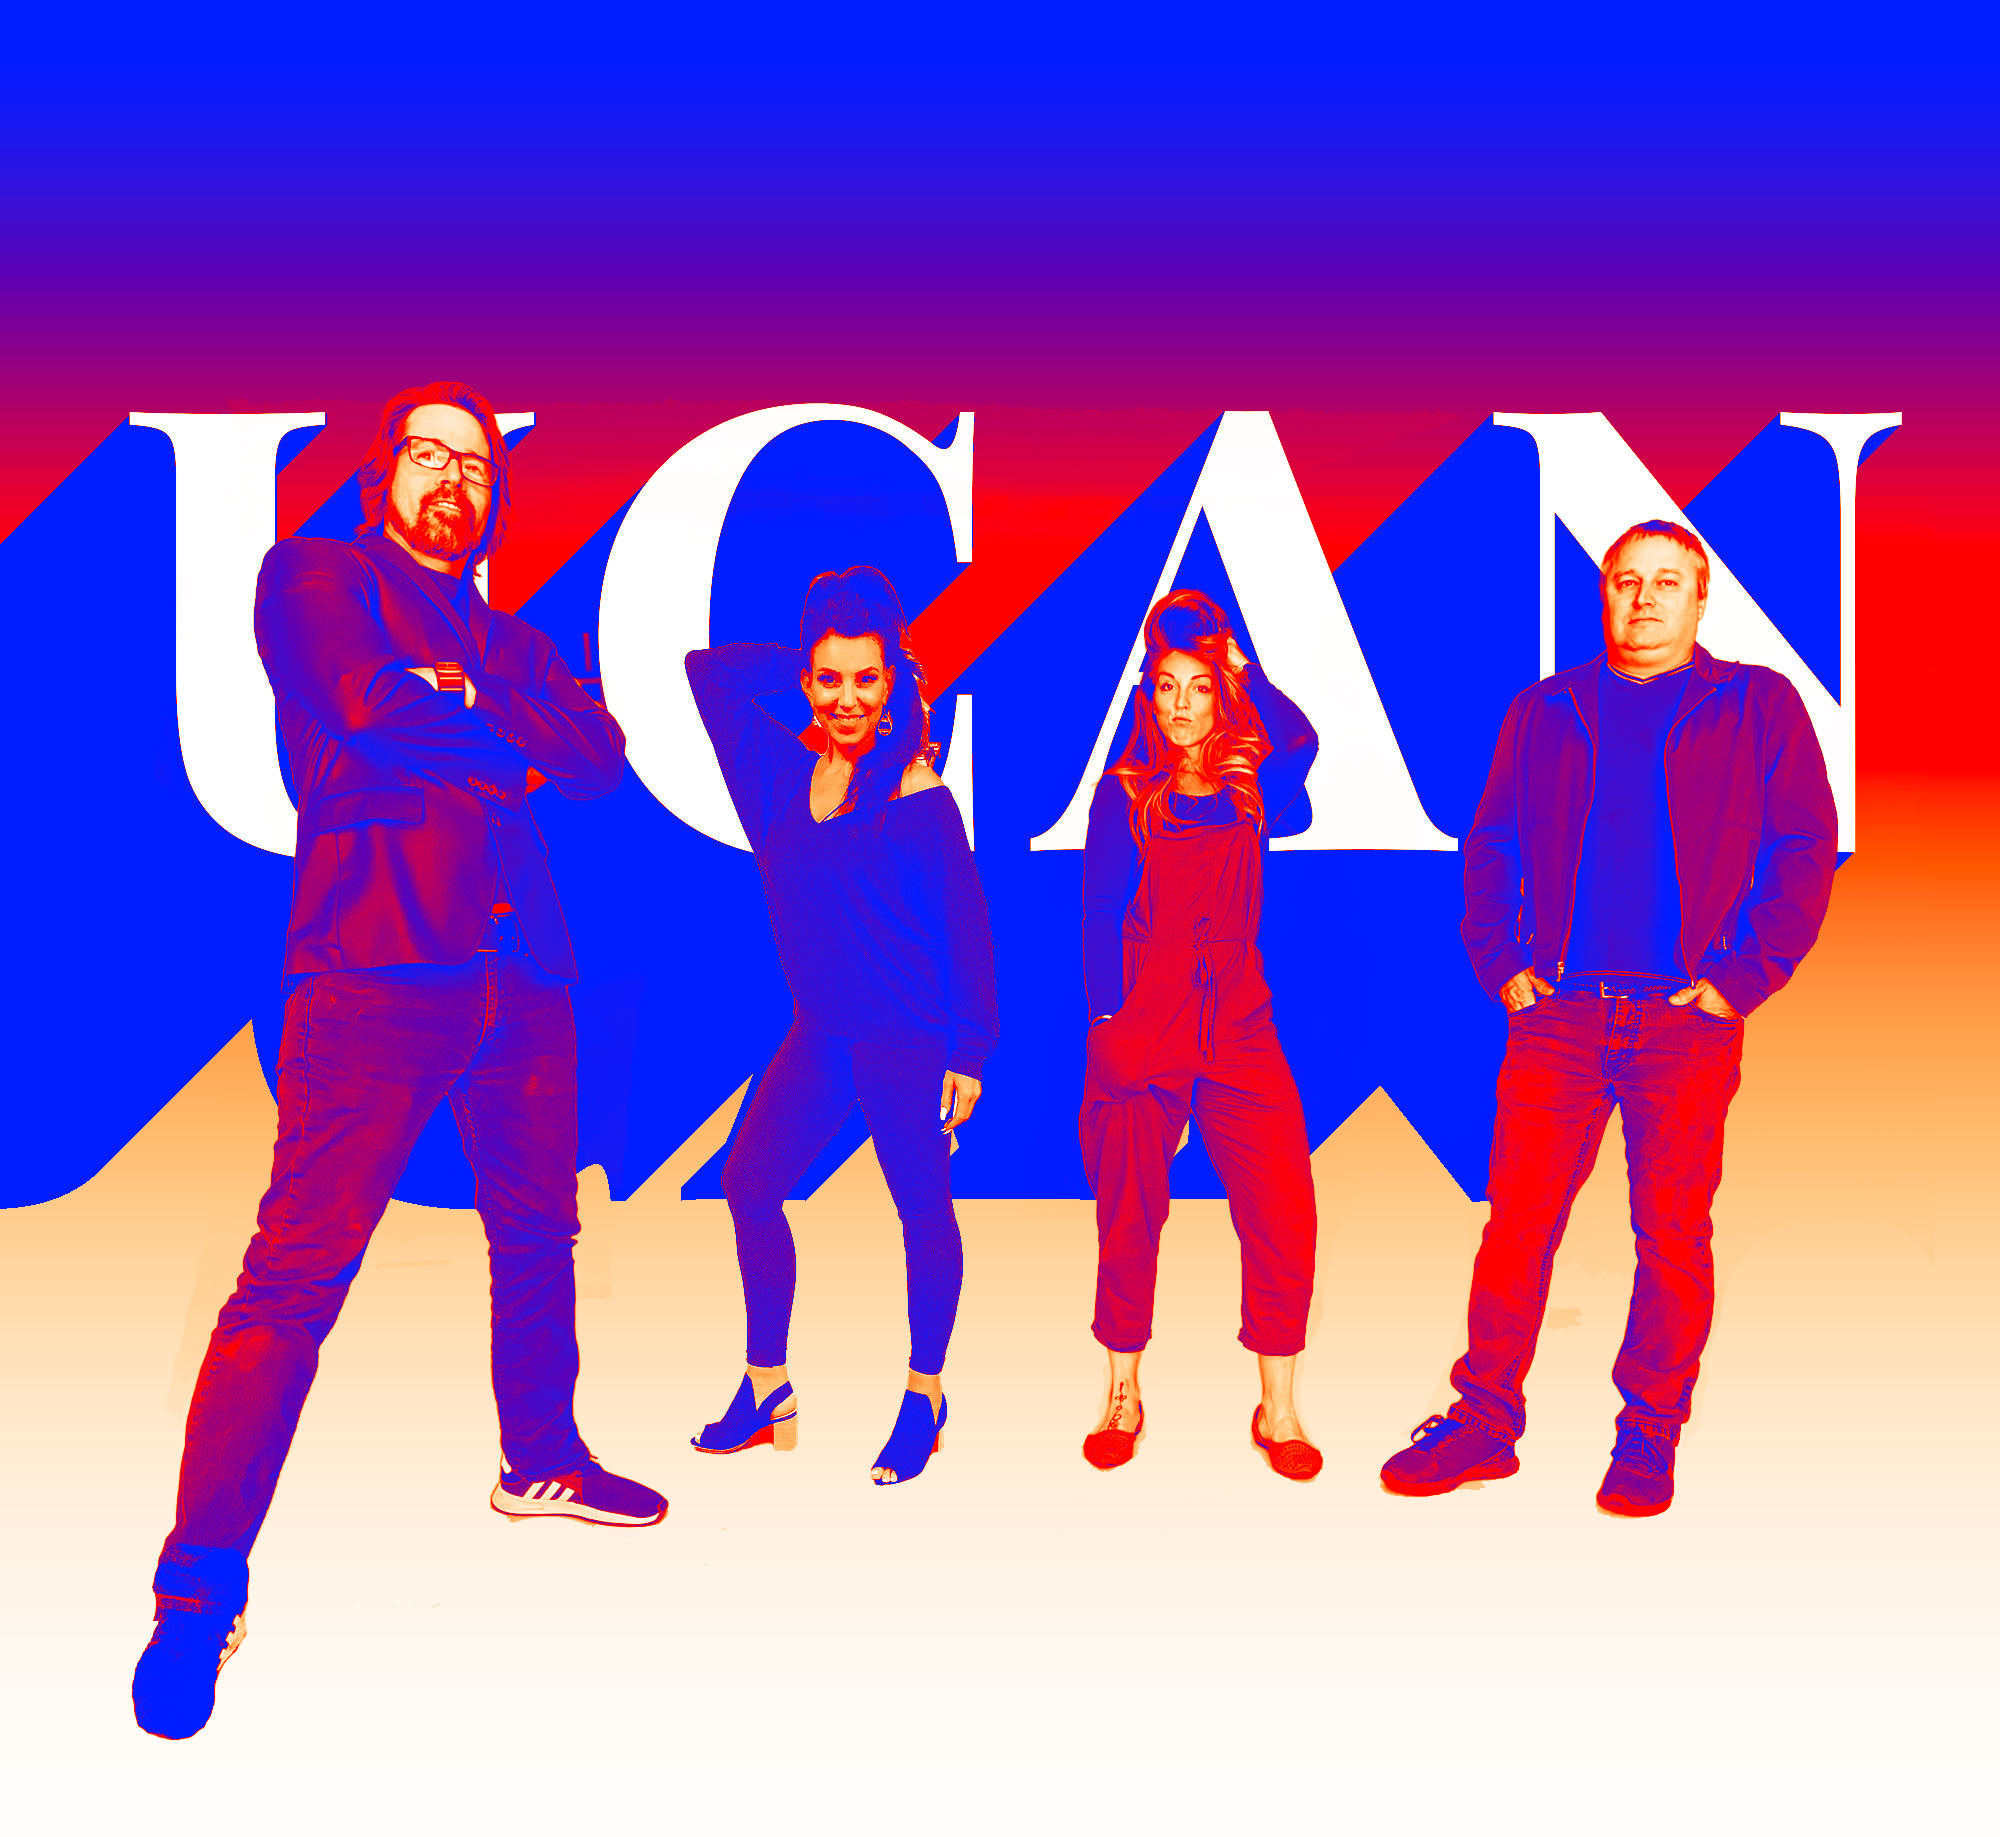 UCAN-crew-shoot-promo-layers-drop-shadow-red-white-blue